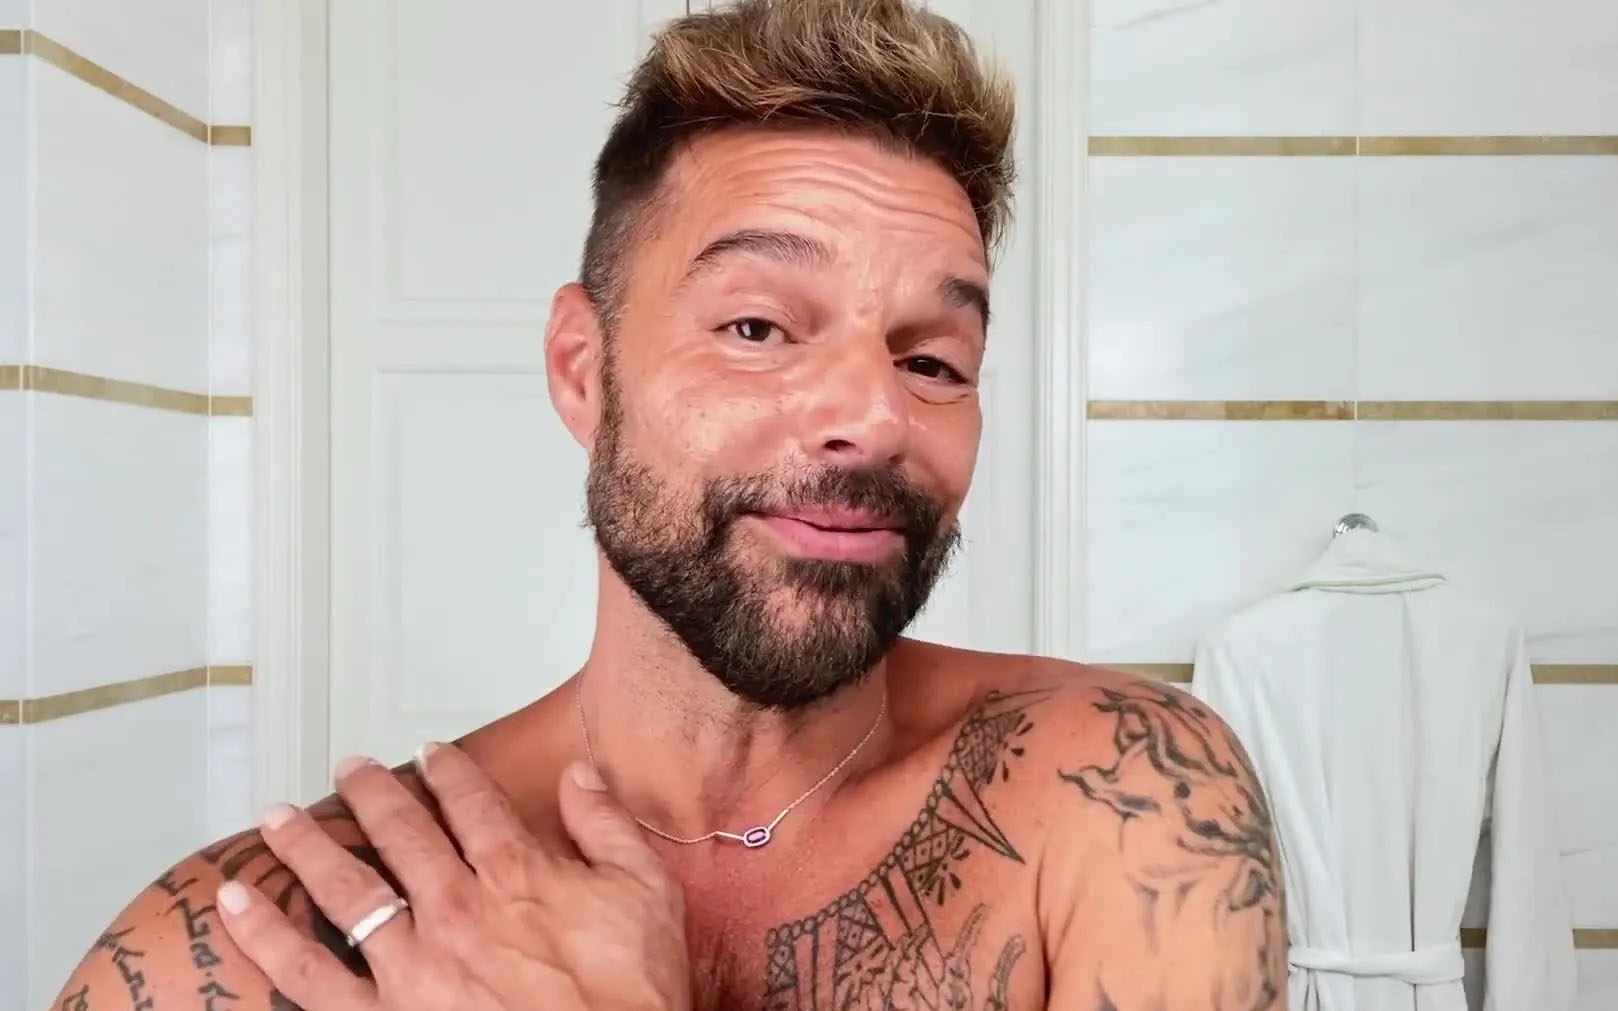 Ricky Martin can relax, because he was cleared of charges